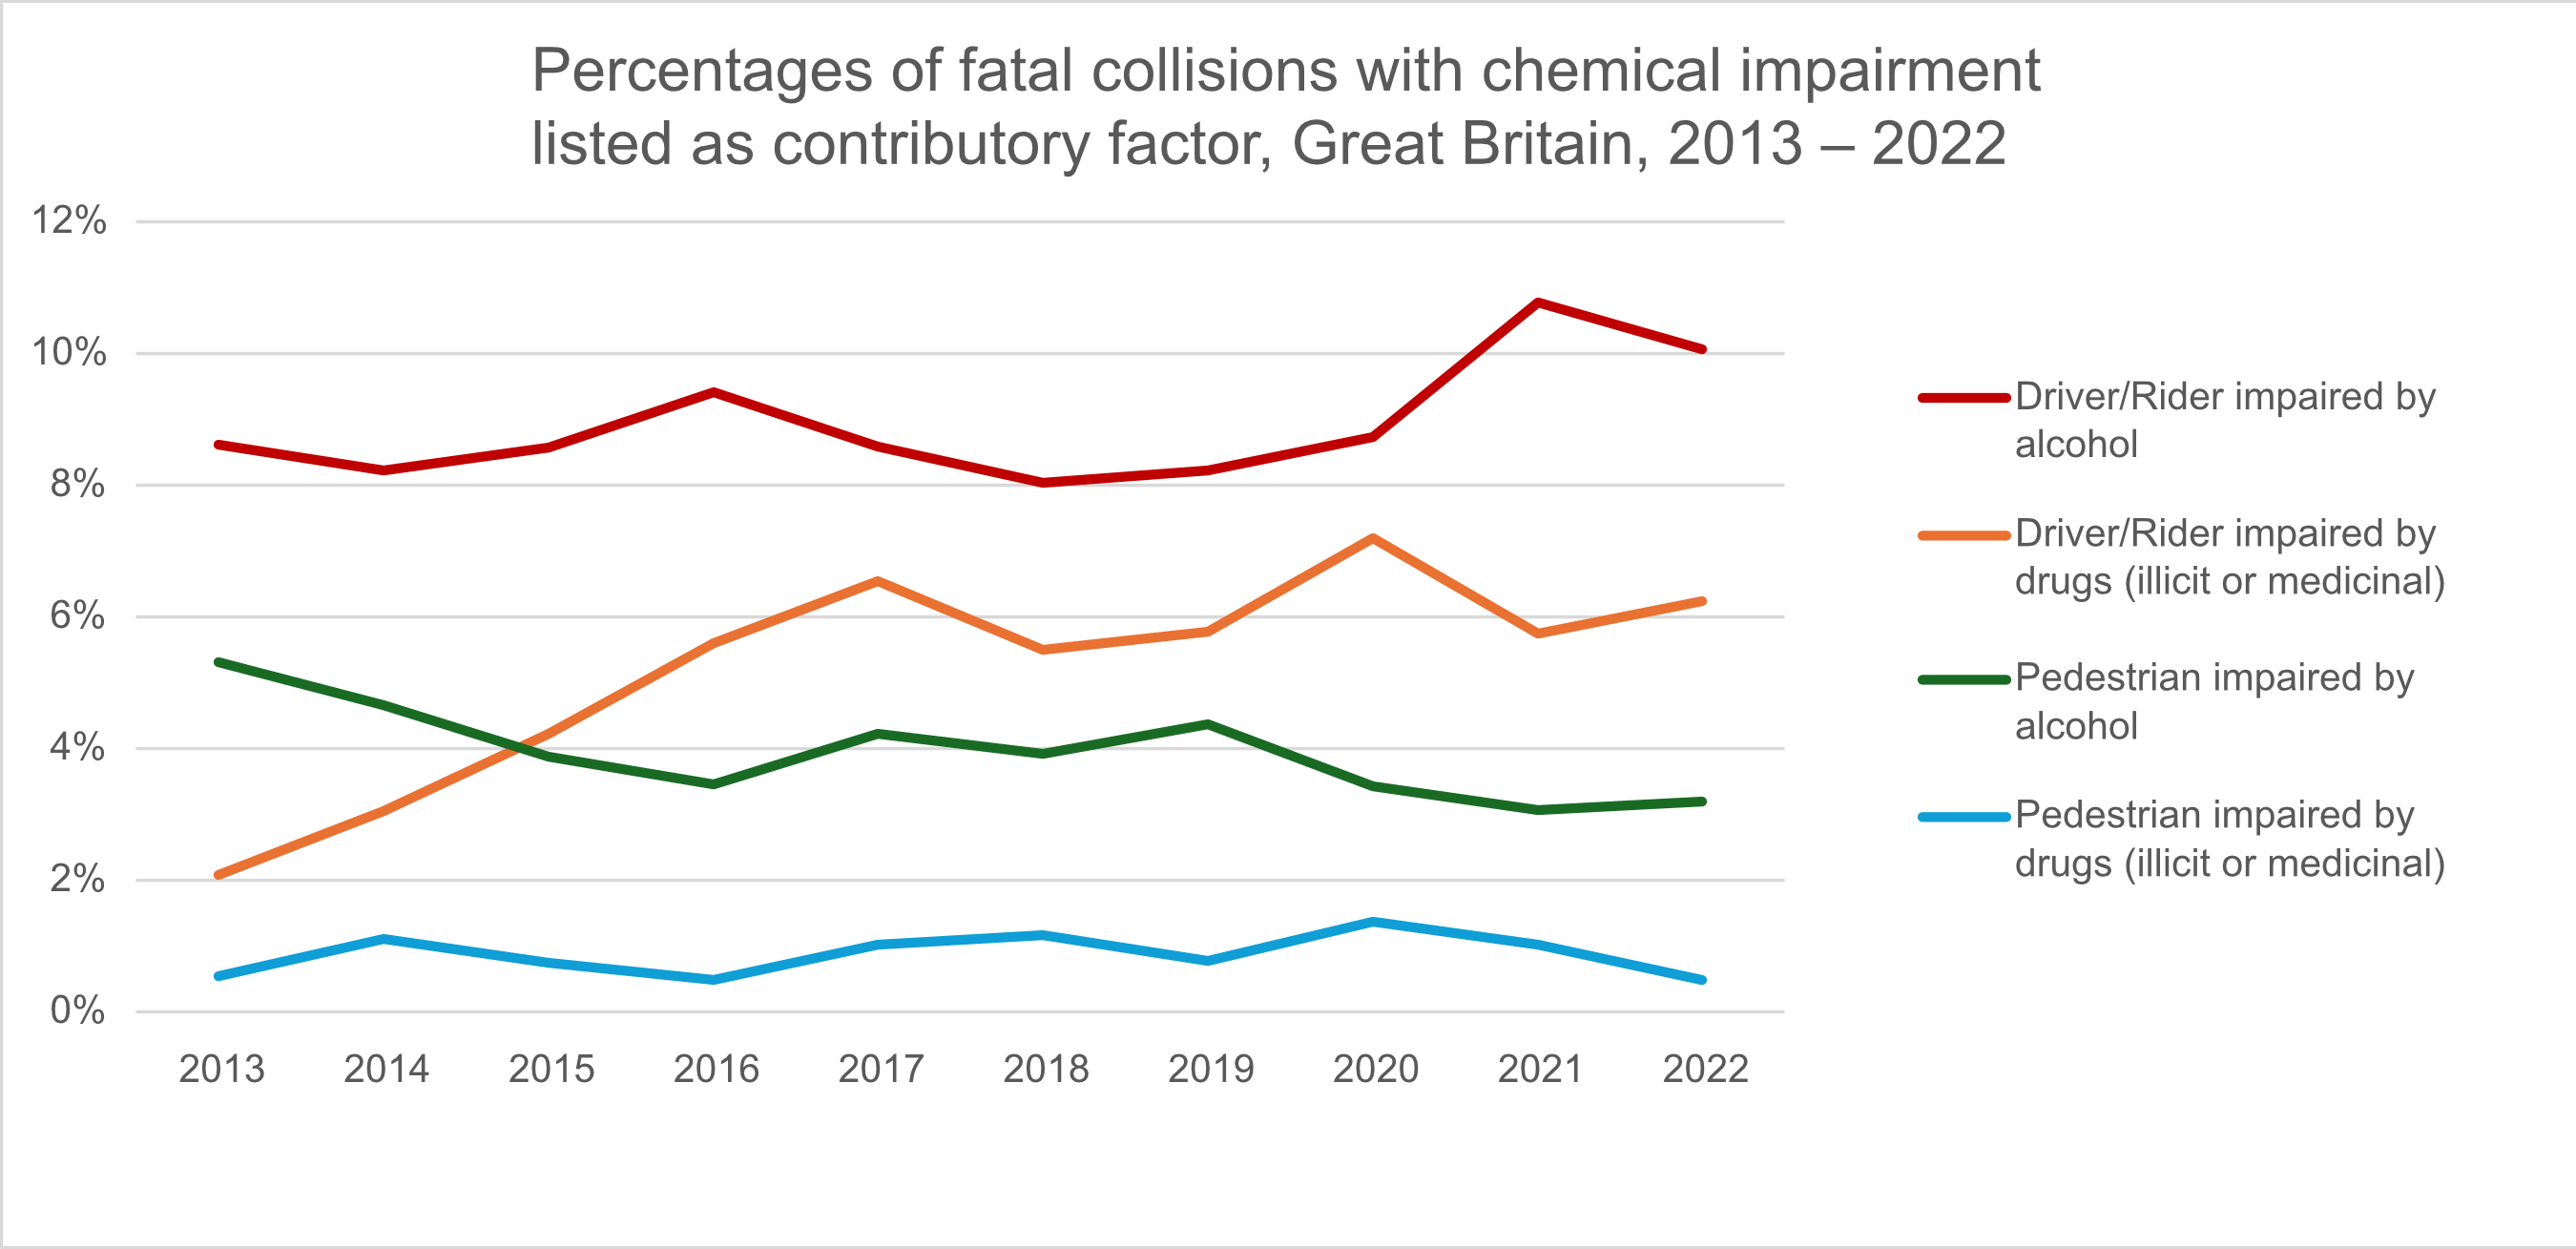 Fatal collisions caused by impairment